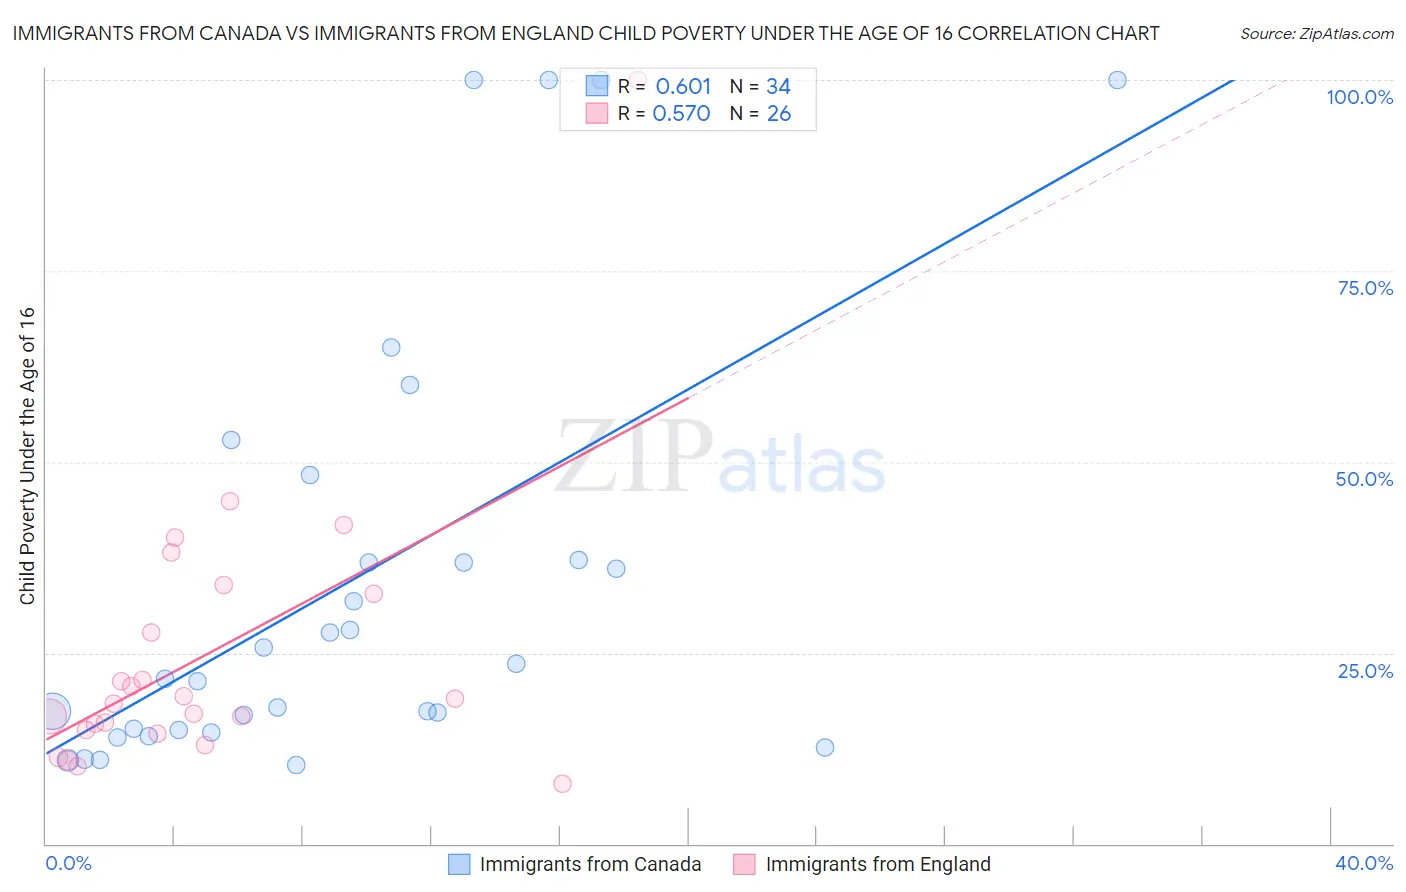 Immigrants from Canada vs Immigrants from England Child Poverty Under the Age of 16